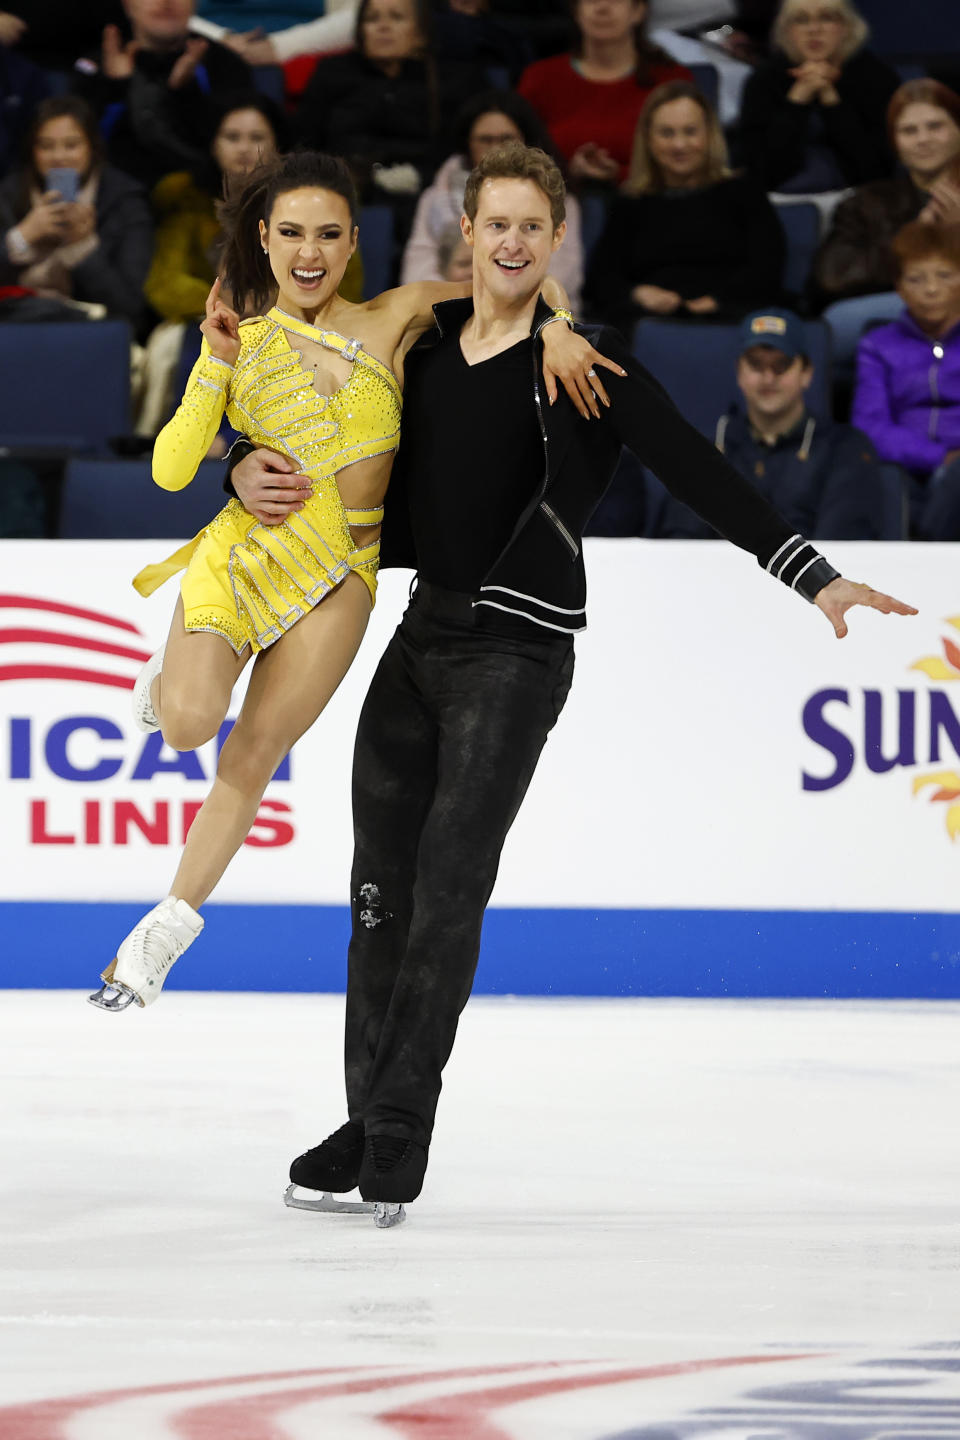 Madison Chock, left, and Evan Bates, of the United States, compete in the ice dance rhythm dance program during the Skate America figure skating event in Allen, Texas, Saturday, Oct. 21, 2023. (AP Photo/Roger Steinman)